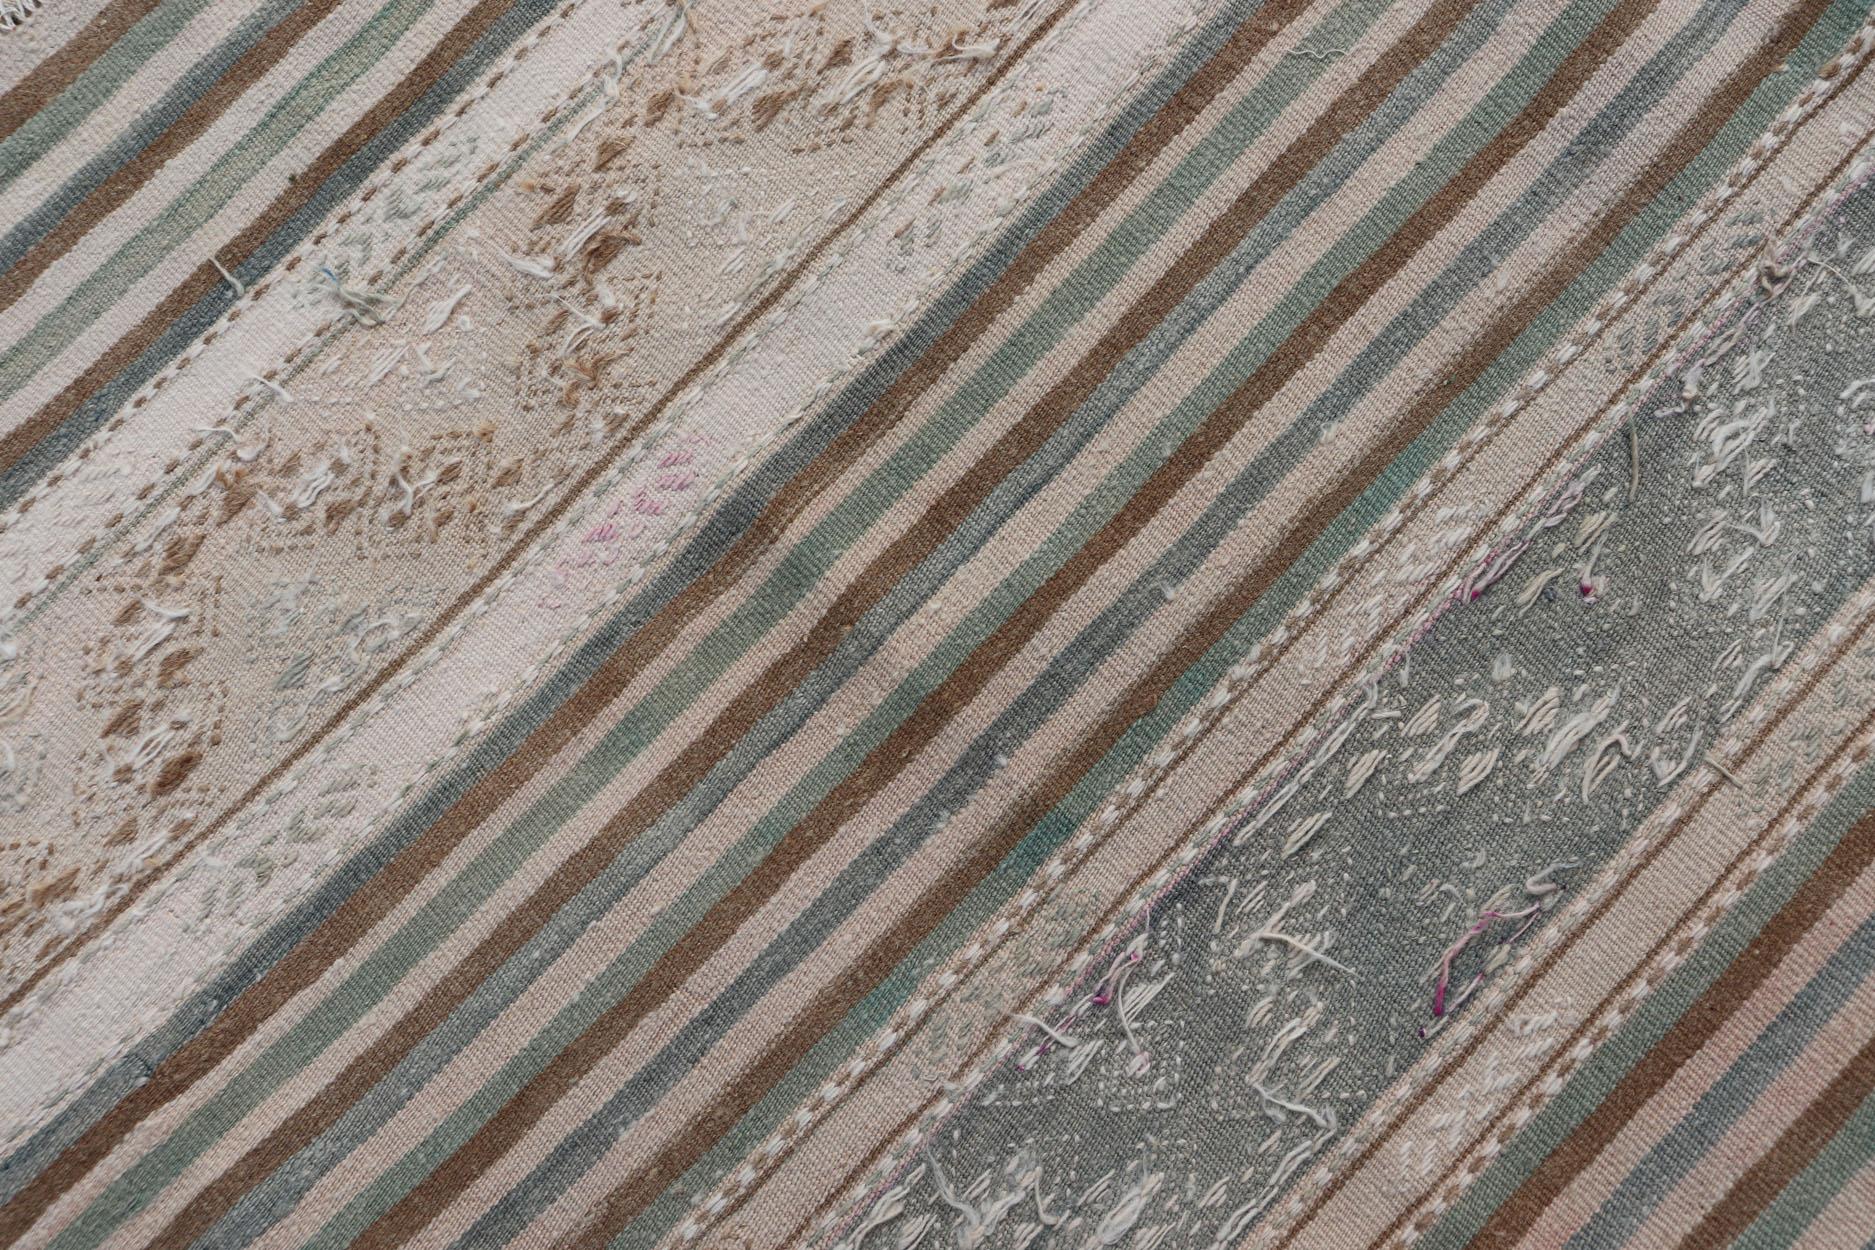 Turkish Flat-Weave Kilim with Stripes and Embroideries In Blue, Green, and Cream For Sale 5